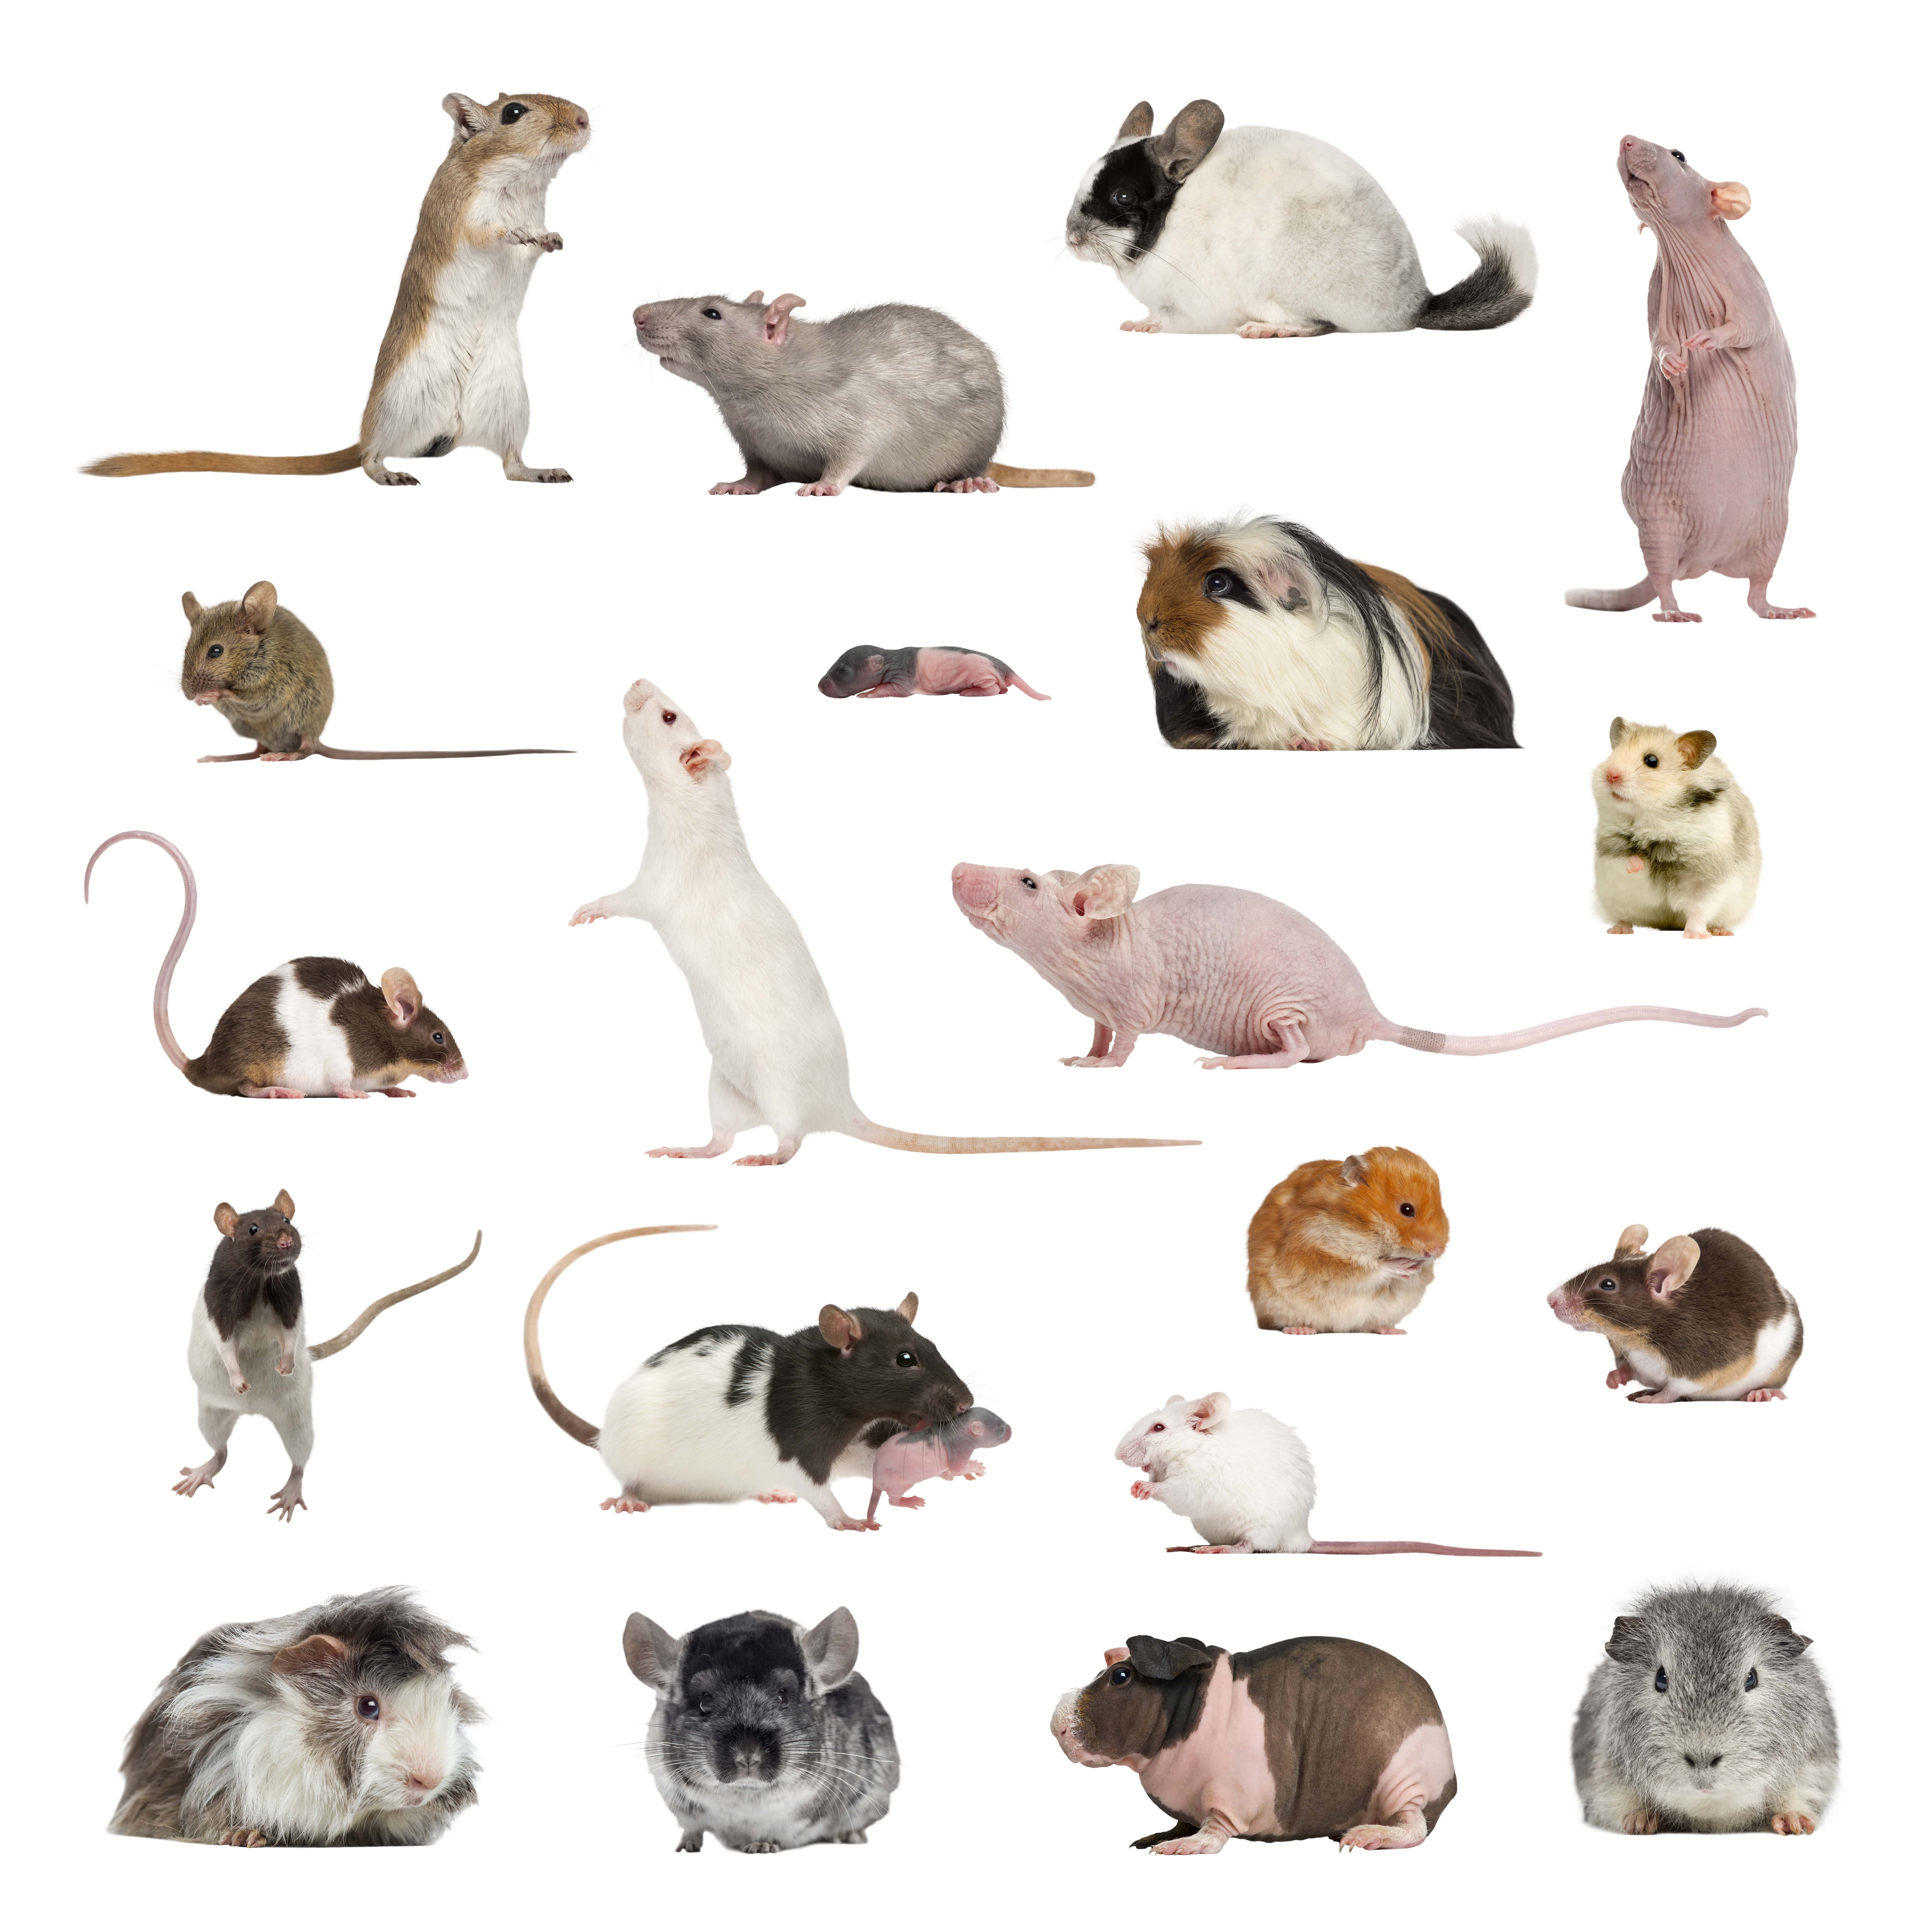 large-collection-of-rodent-pet-and-exotic-in-dif-min